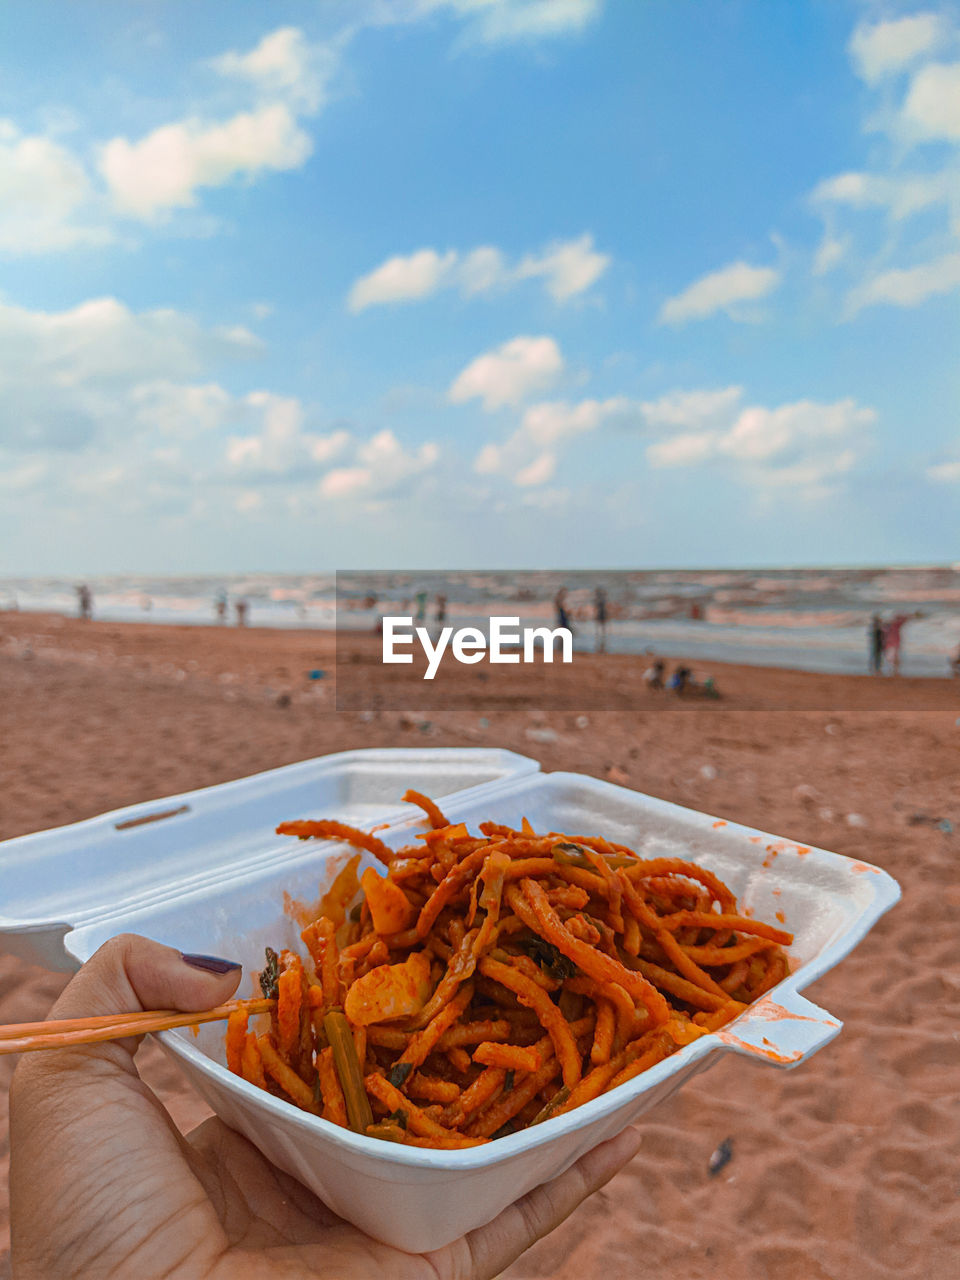 CLOSE-UP OF FOOD ON BEACH